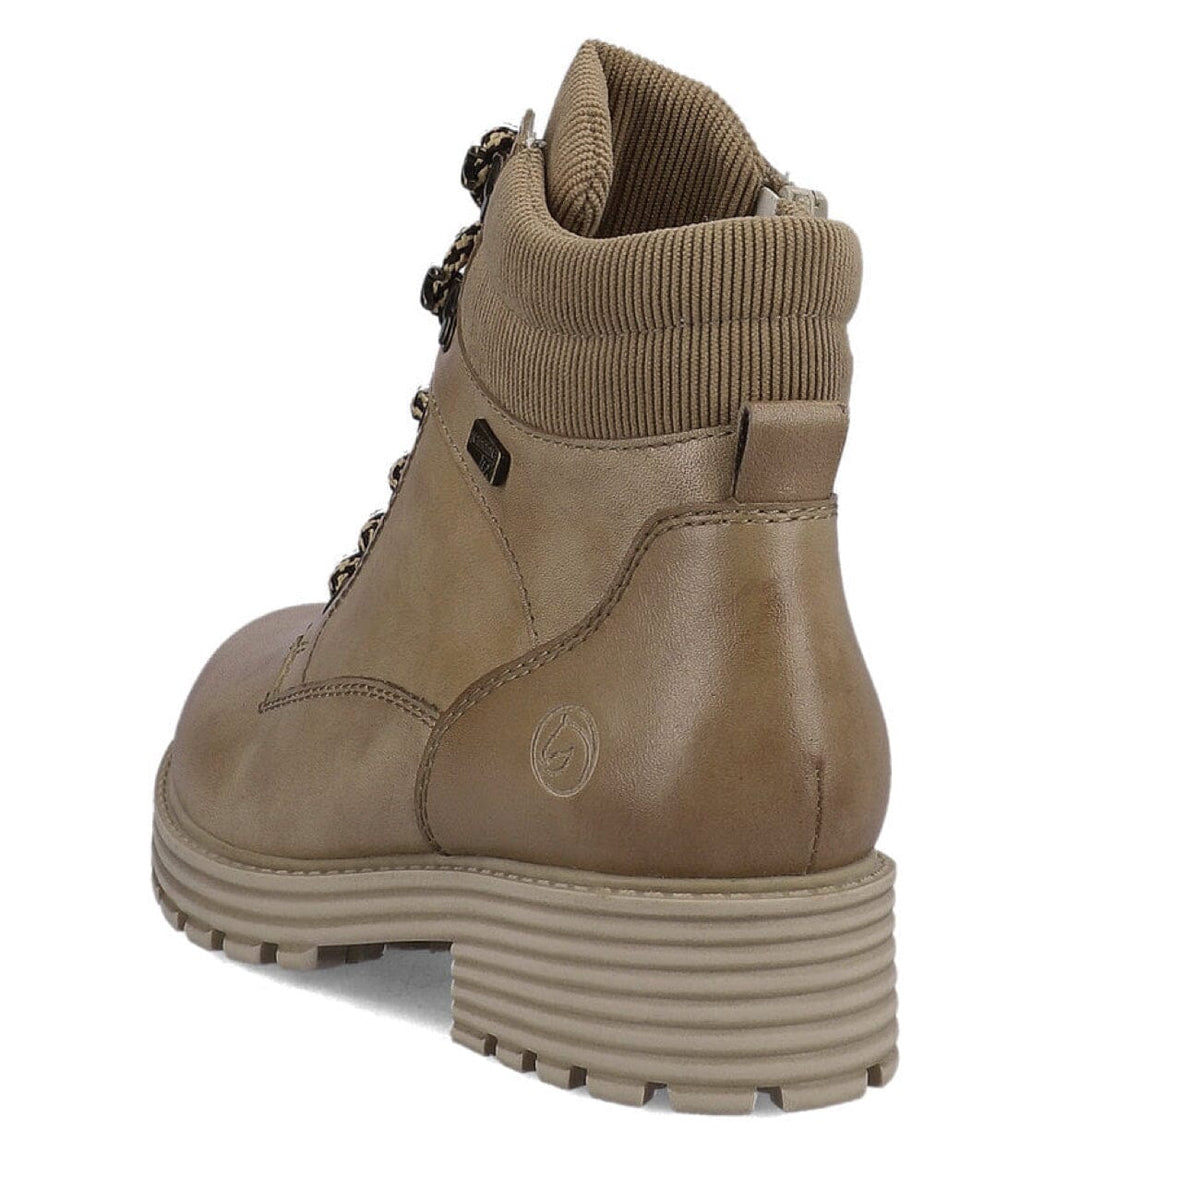 Remonte, DOW75-20, Boot, Leather, Taupe-Mushroom Boots Remonte 